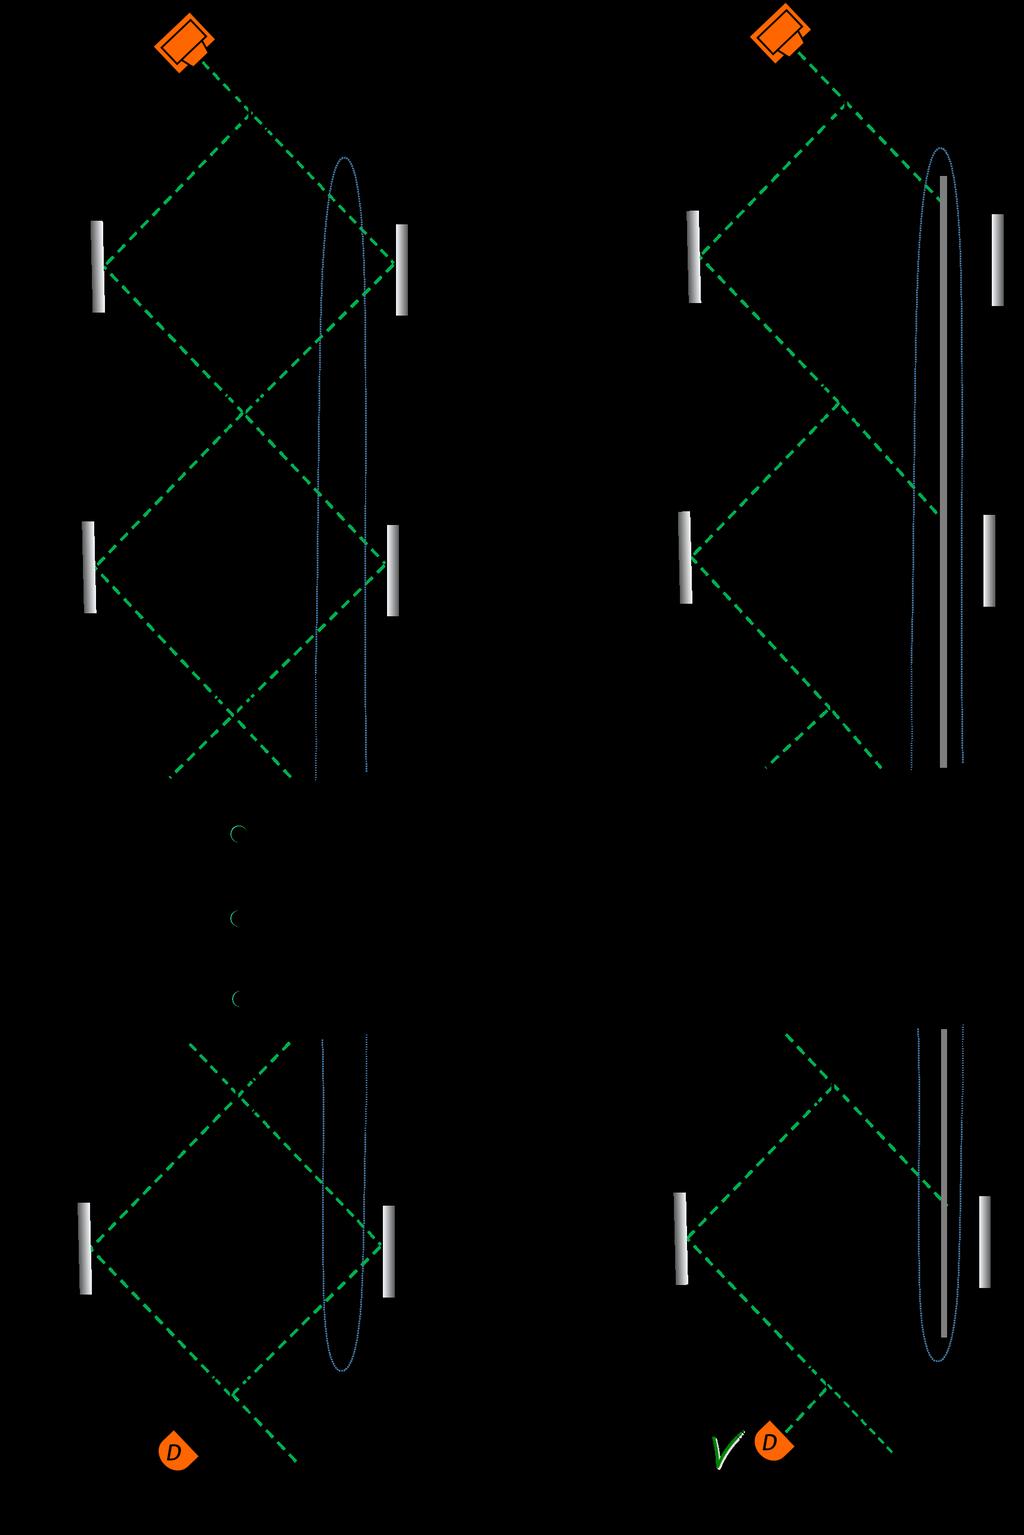 FIG. 3: a) The interferometer is tuned in such a way that detector D never clicks if the paths are